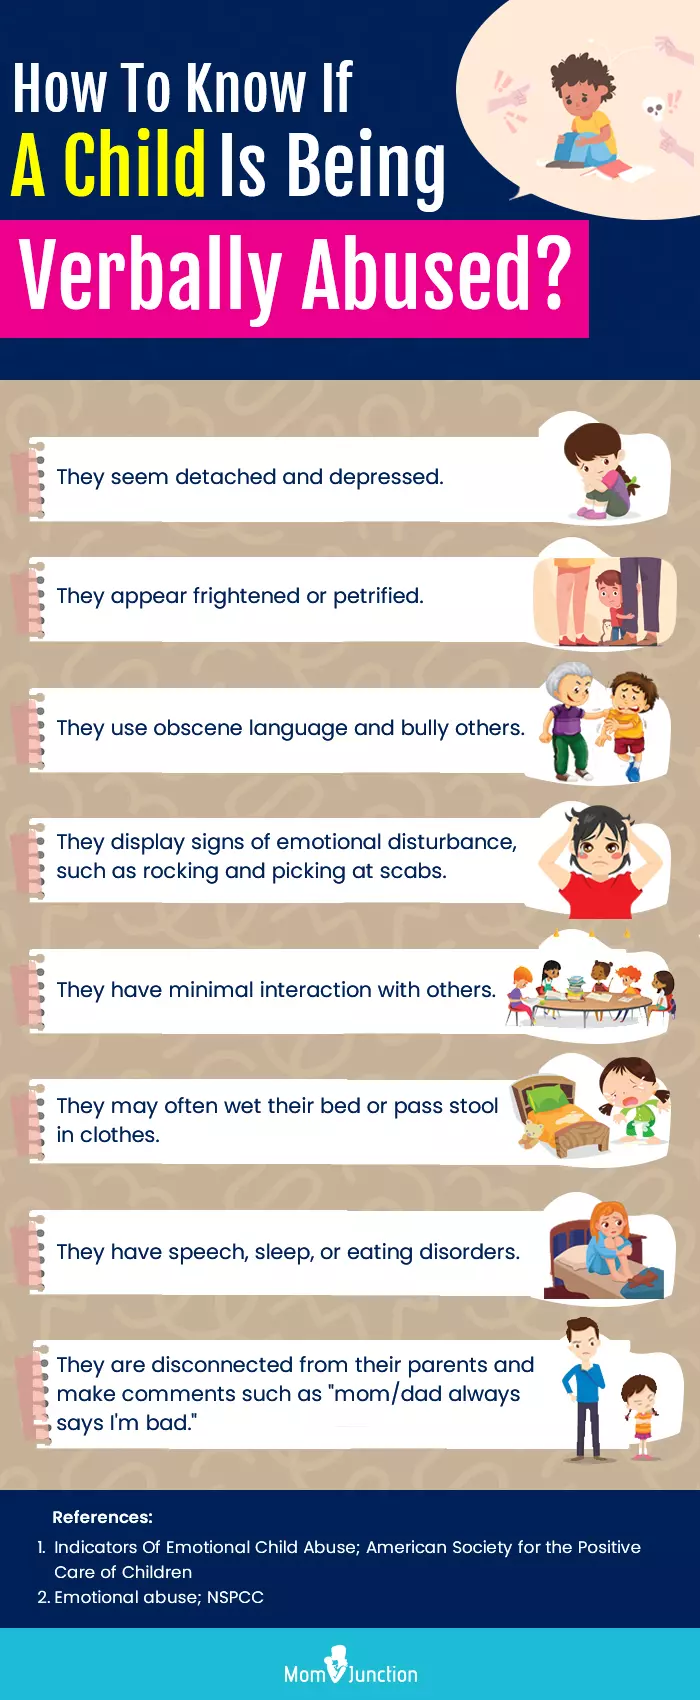 how to know if a child is being verbally abused (infographic)